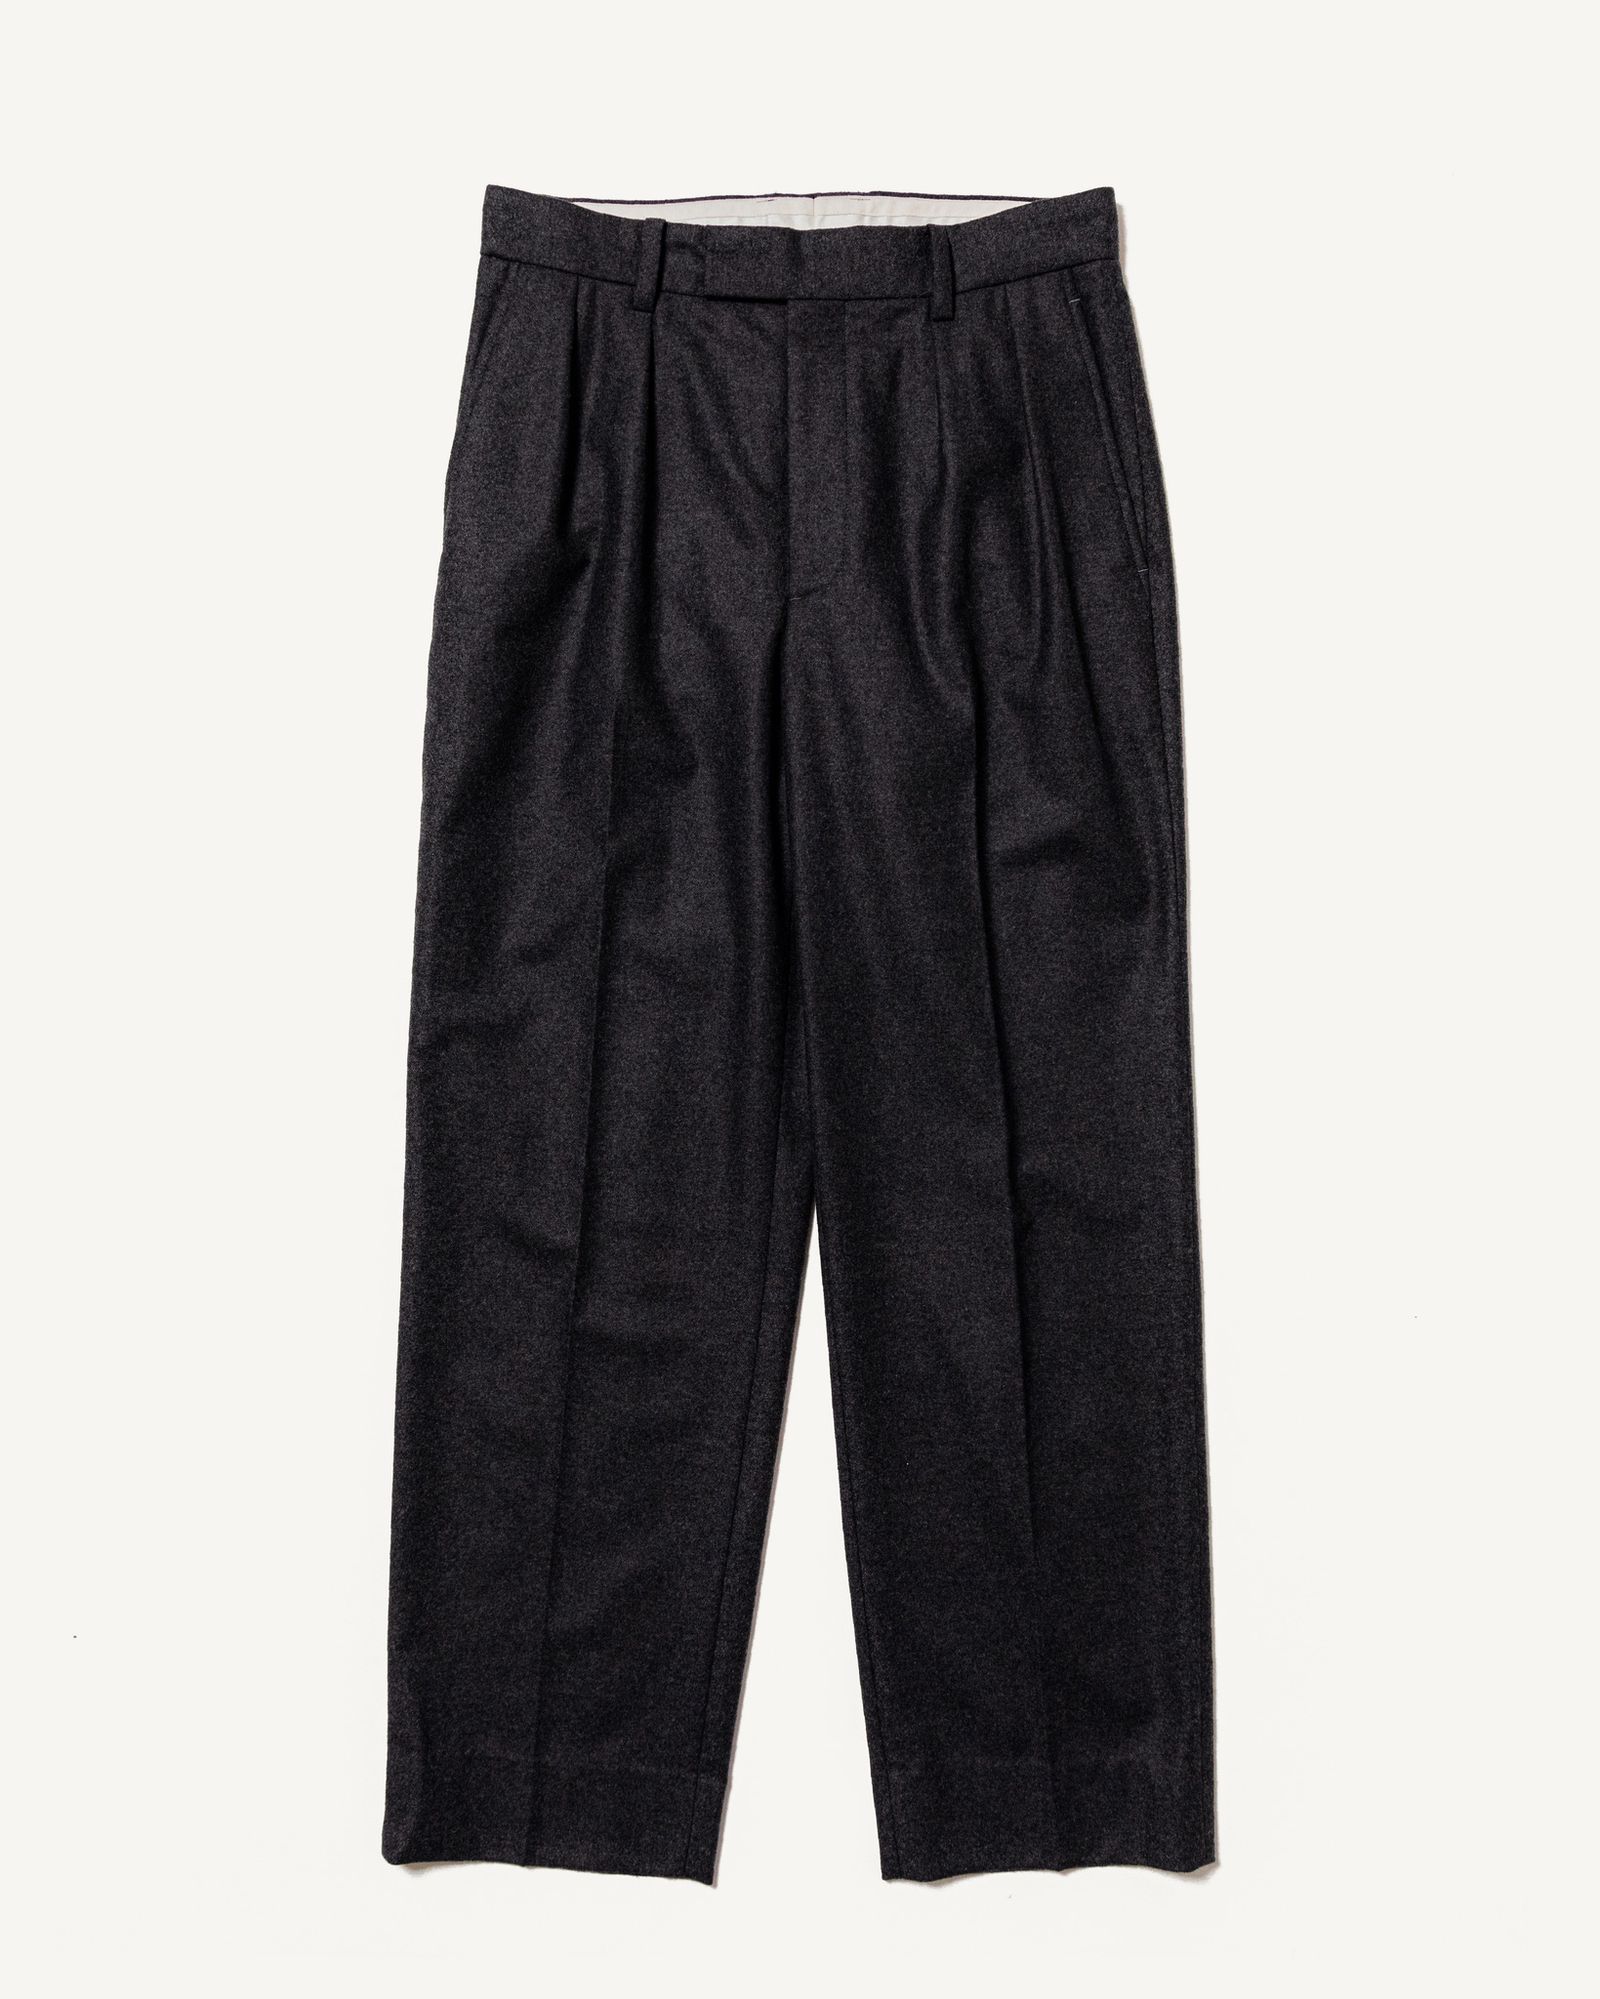 yofficial 23aw wide trousers 爆買い パンツ